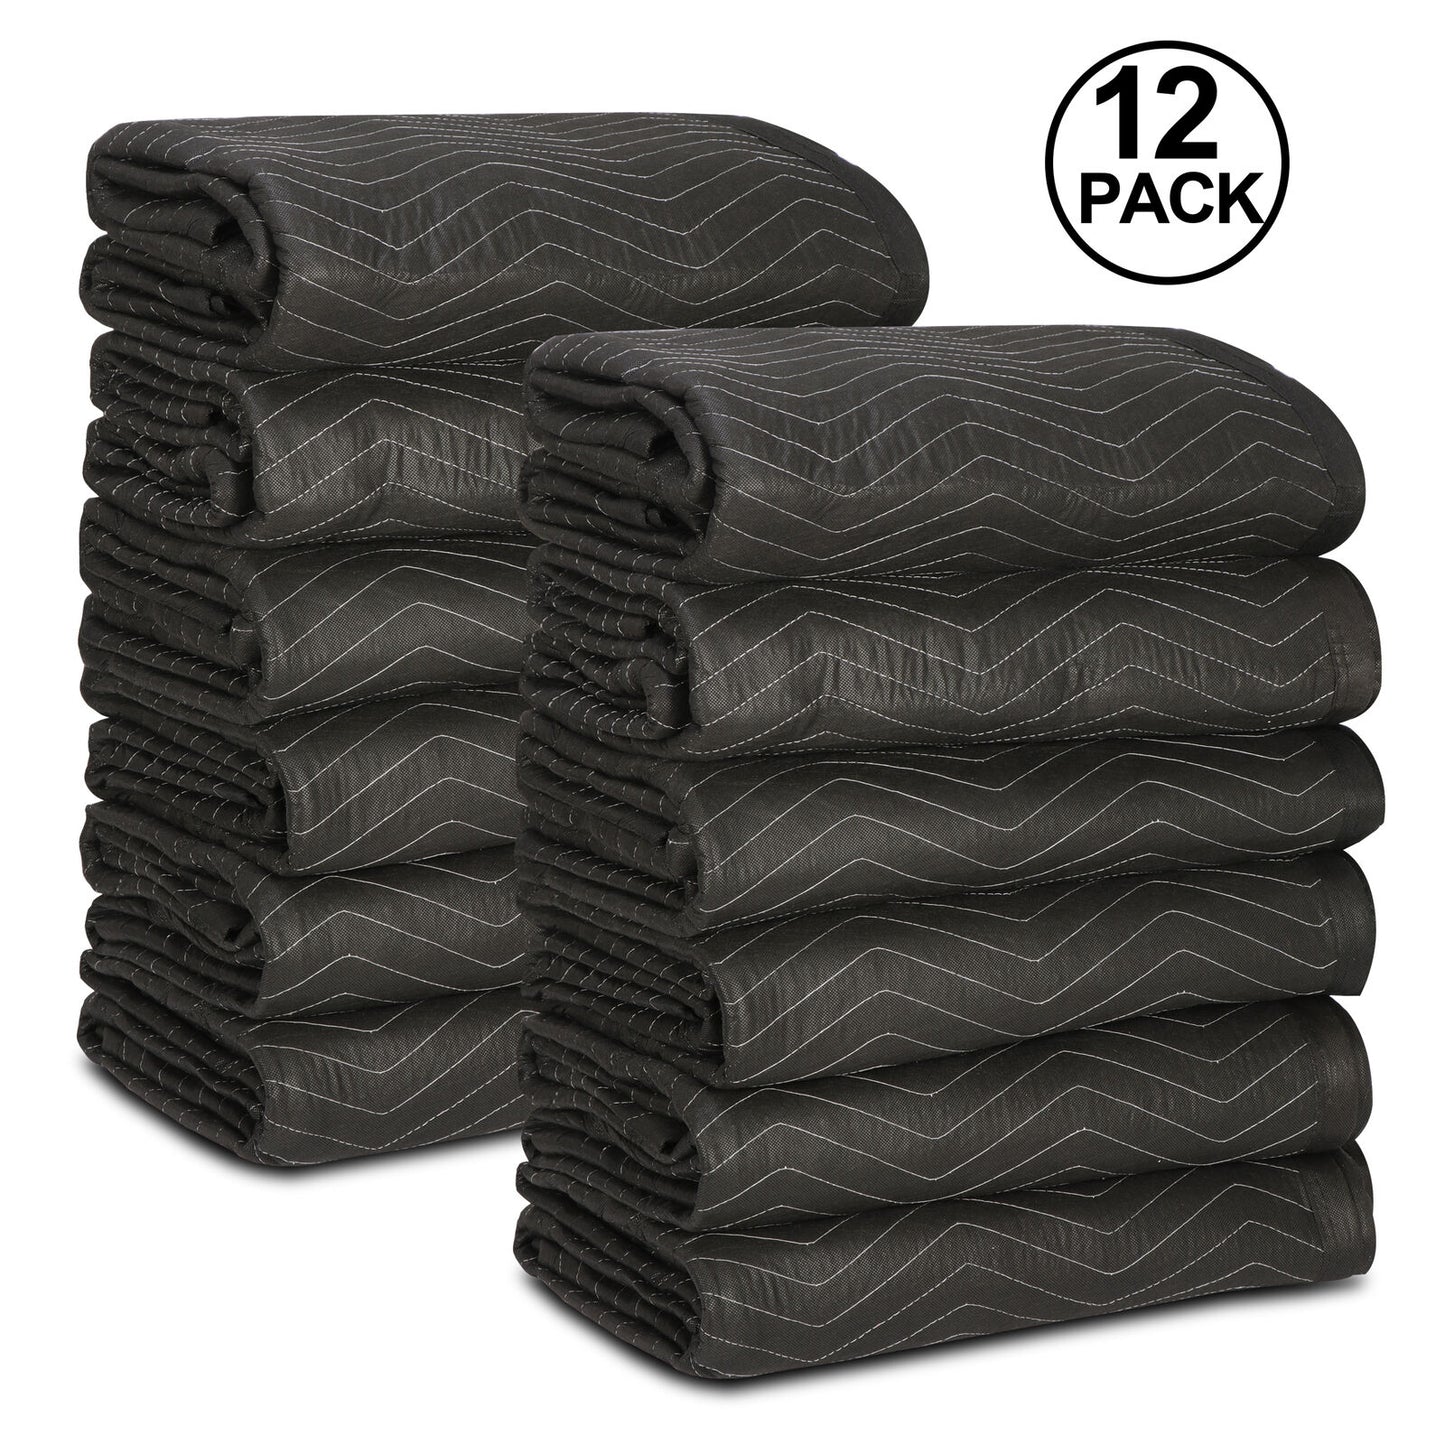 12 Heavy Duty Moving Packing Blankets Ultra Thick Pro 72" x 80" Furniture Pads